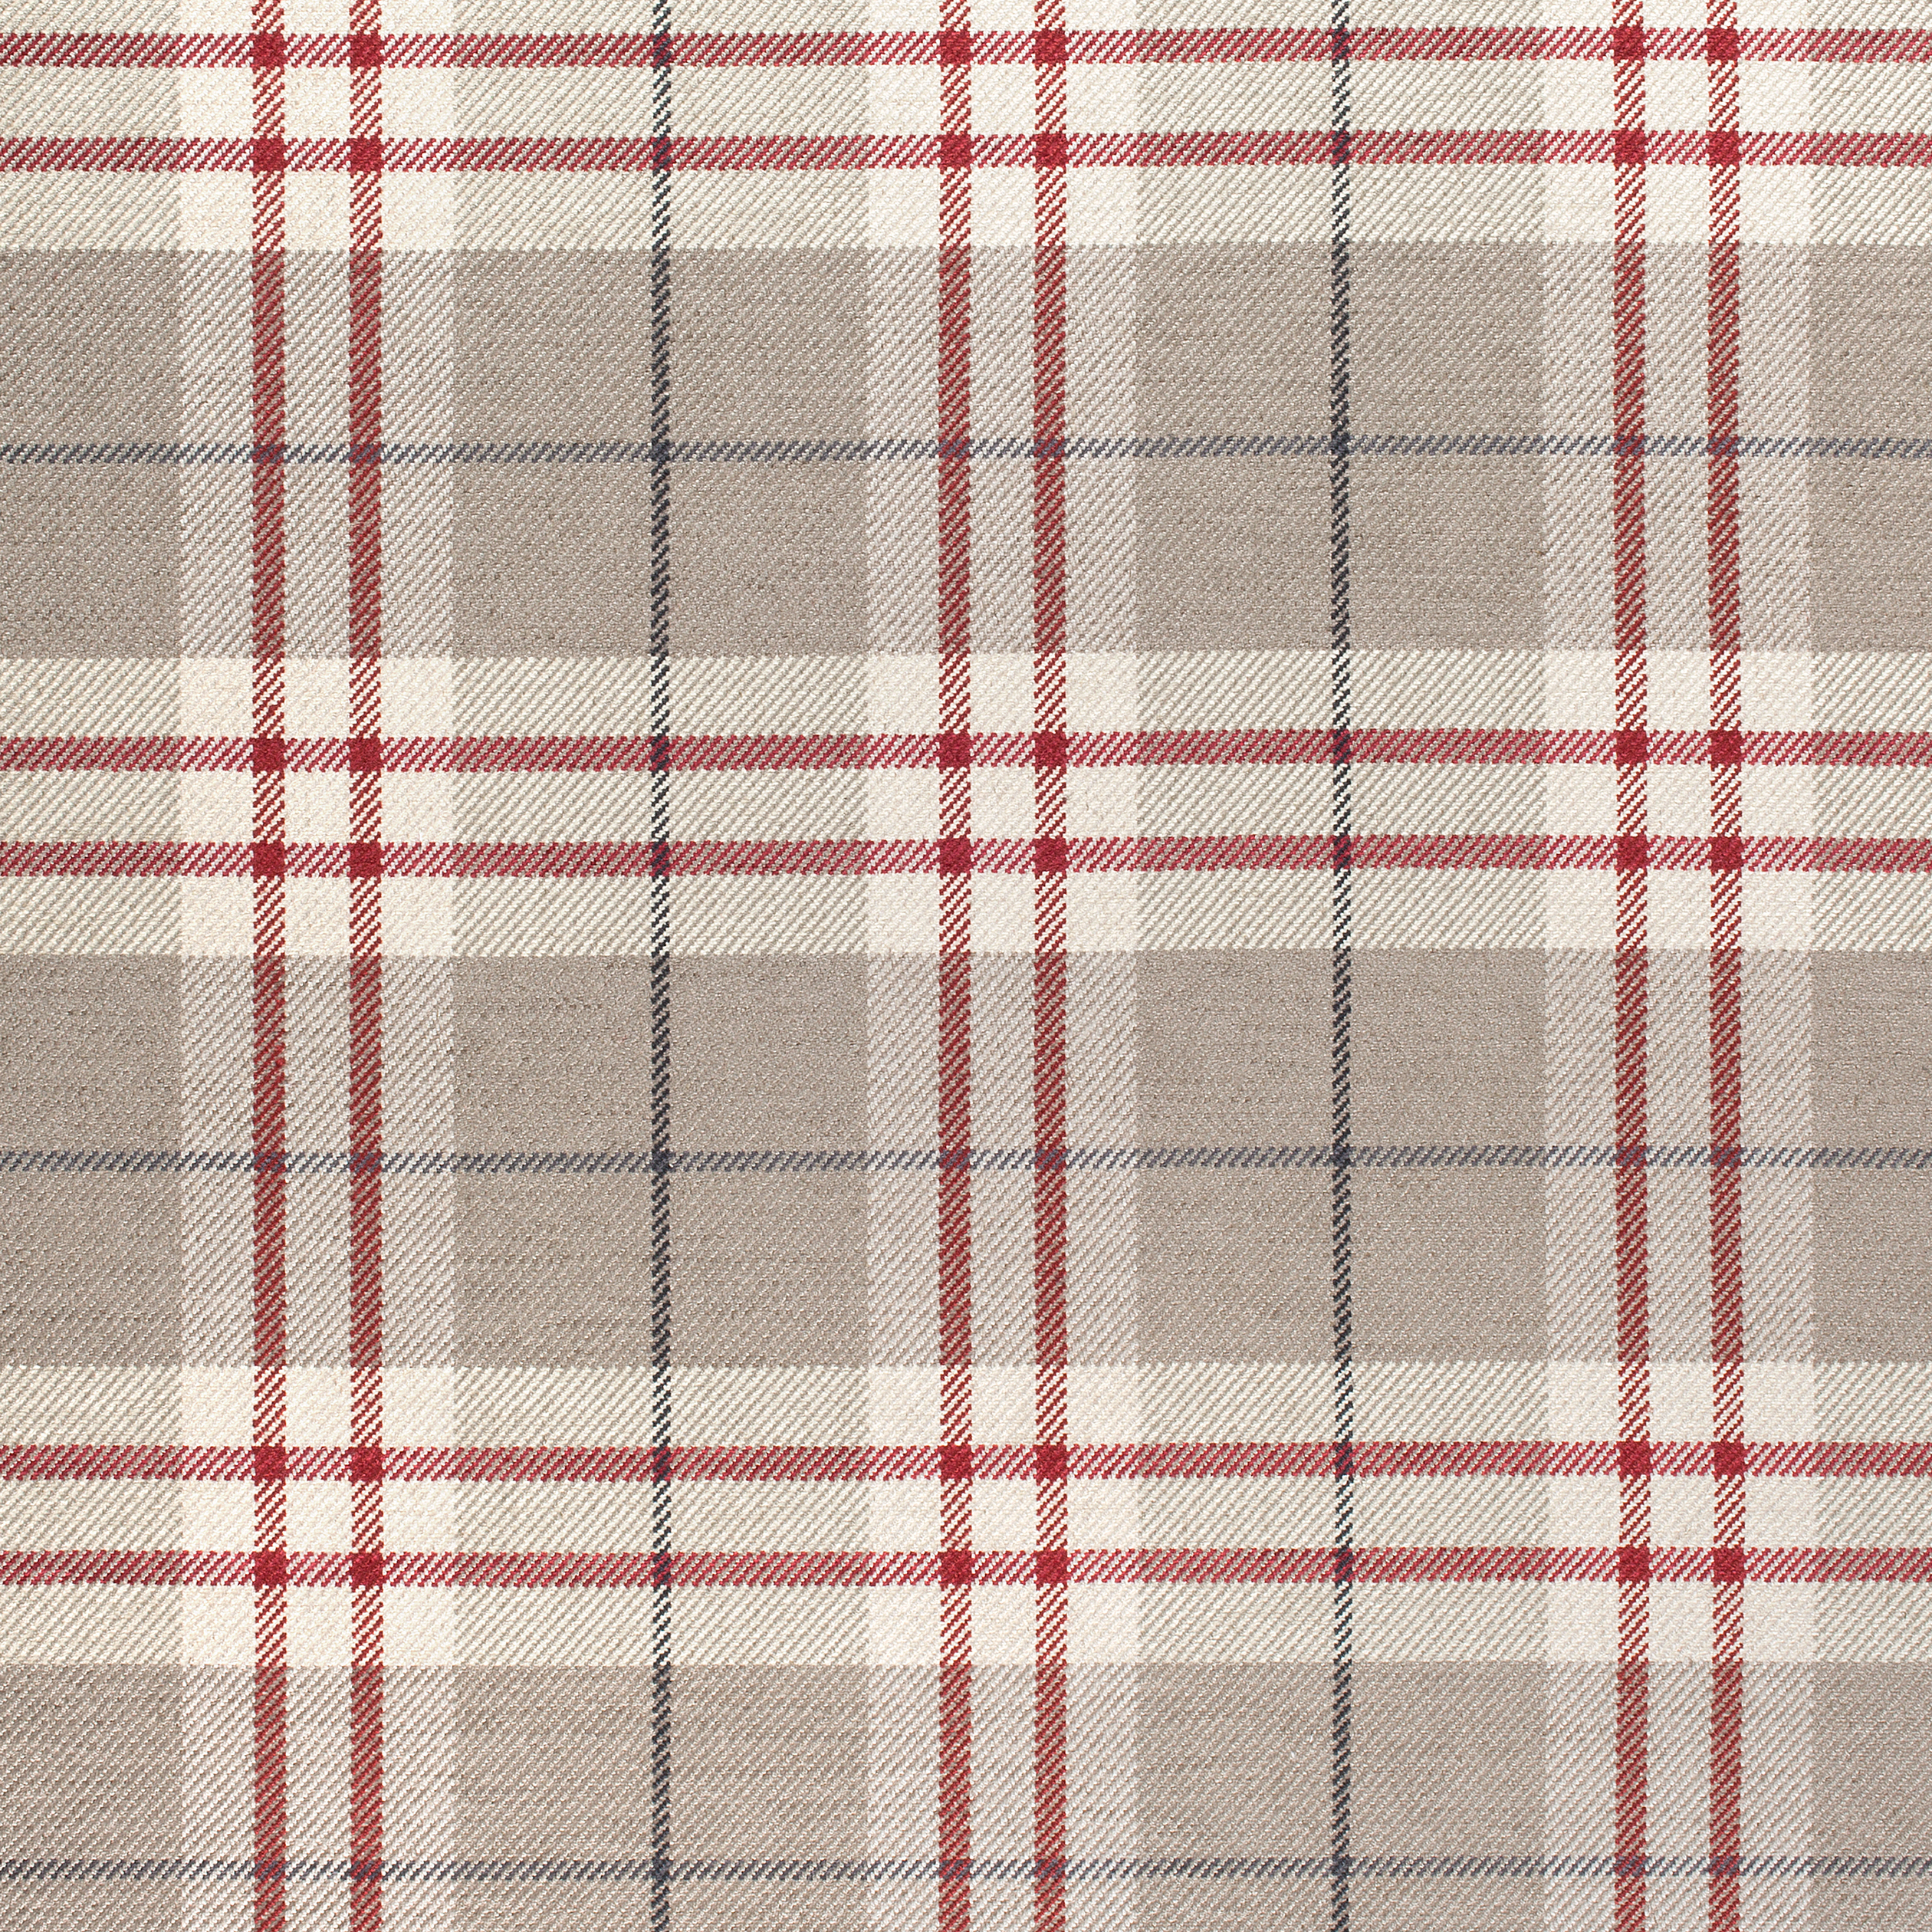 Merry Town by Sharla Fults Diagonal Plaid Red 6368-88 Cotton Woven Fab